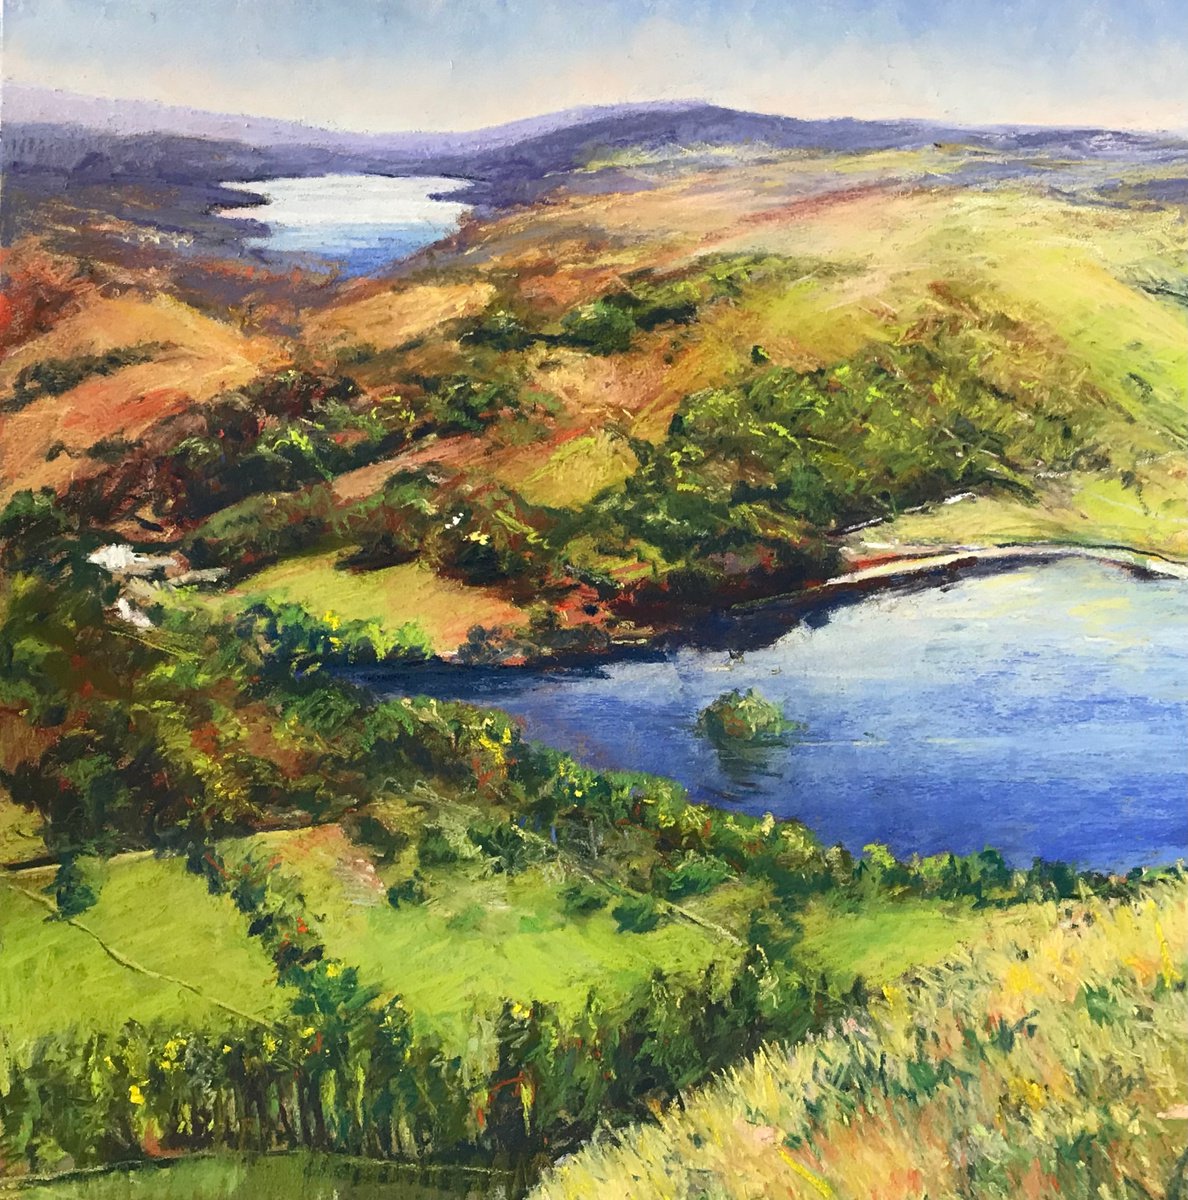 Rydal to Windermere by Andrew Moodie